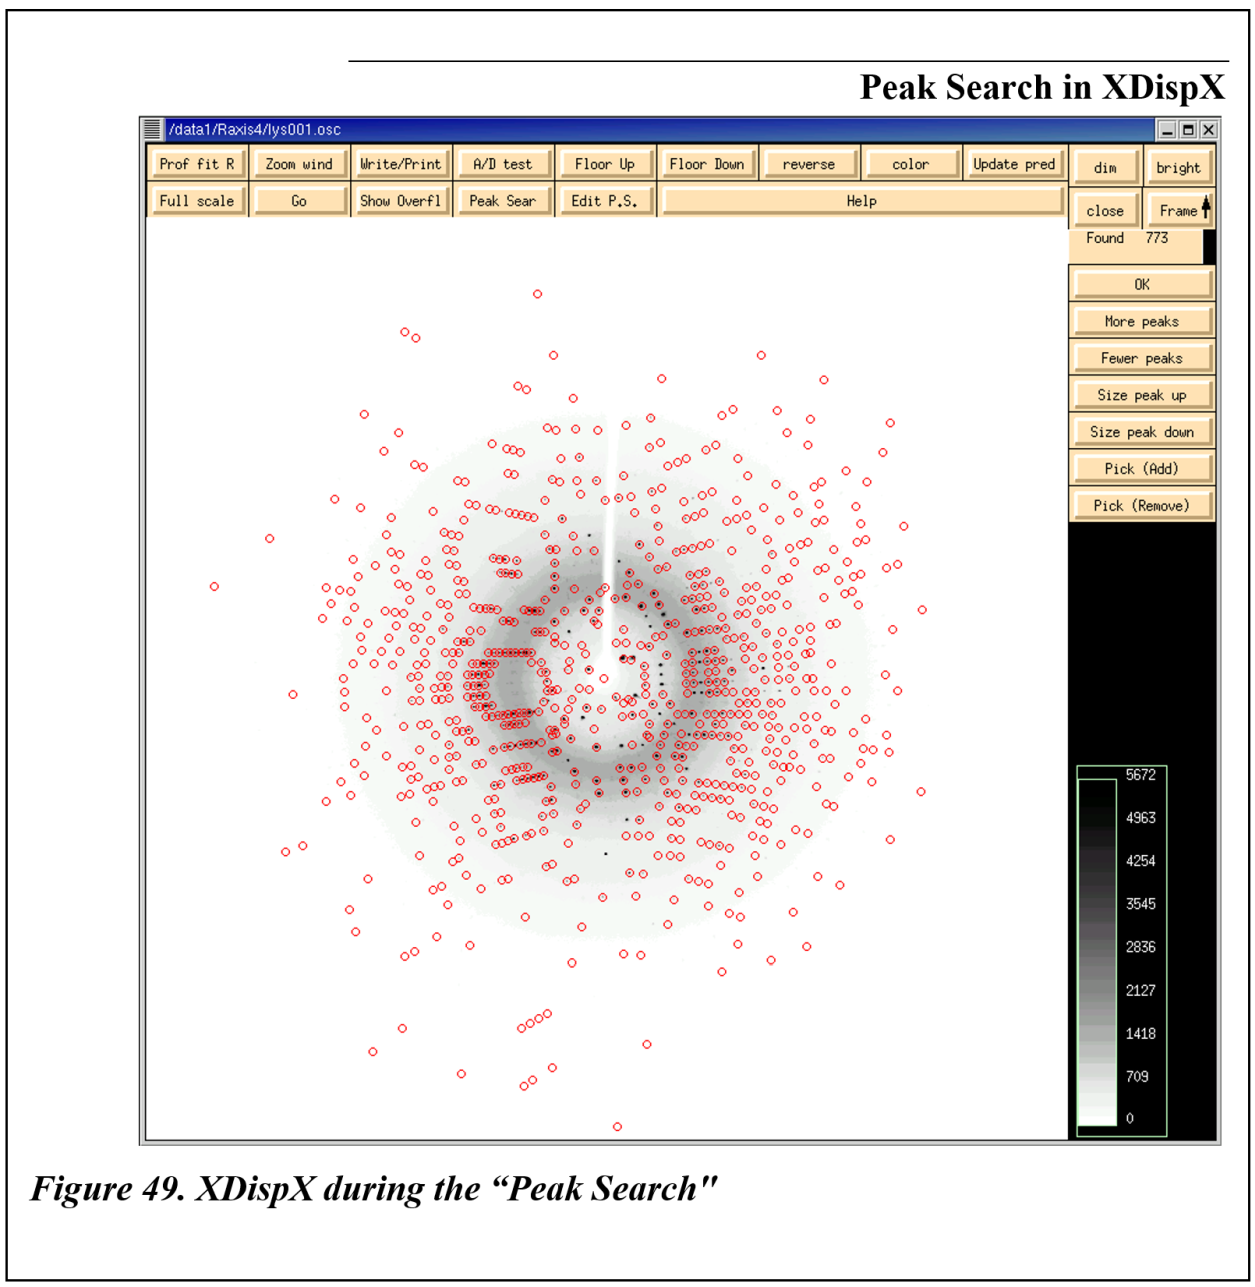 Peak Search in XDispX
 
Figure 49. XDispX during the 